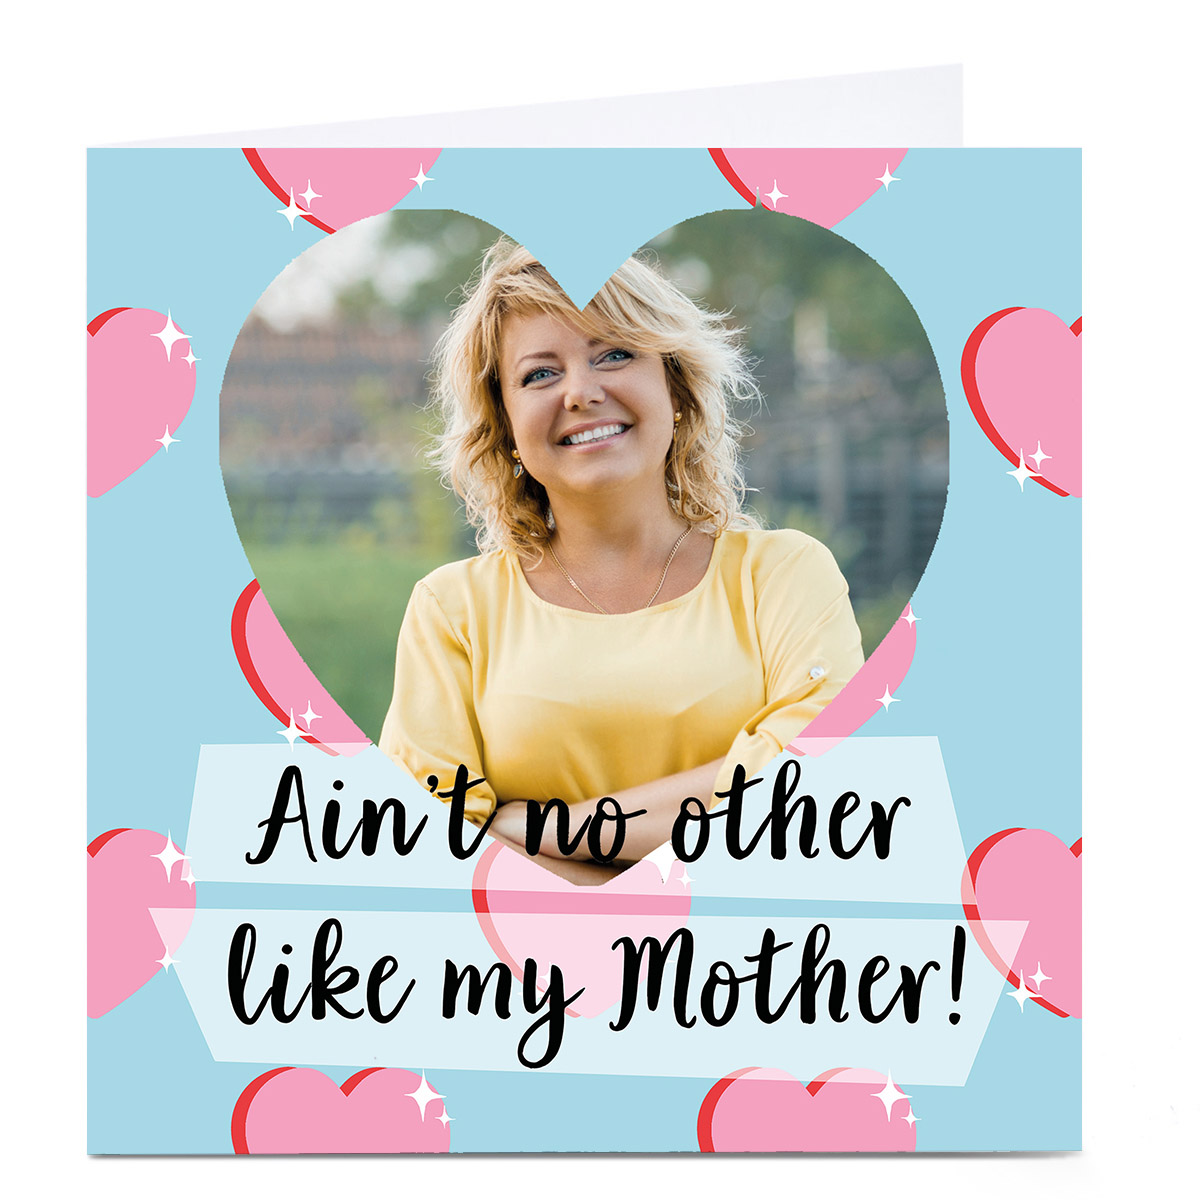 Photo Phoebe Munger Mother's Day Card - Ain't No Other